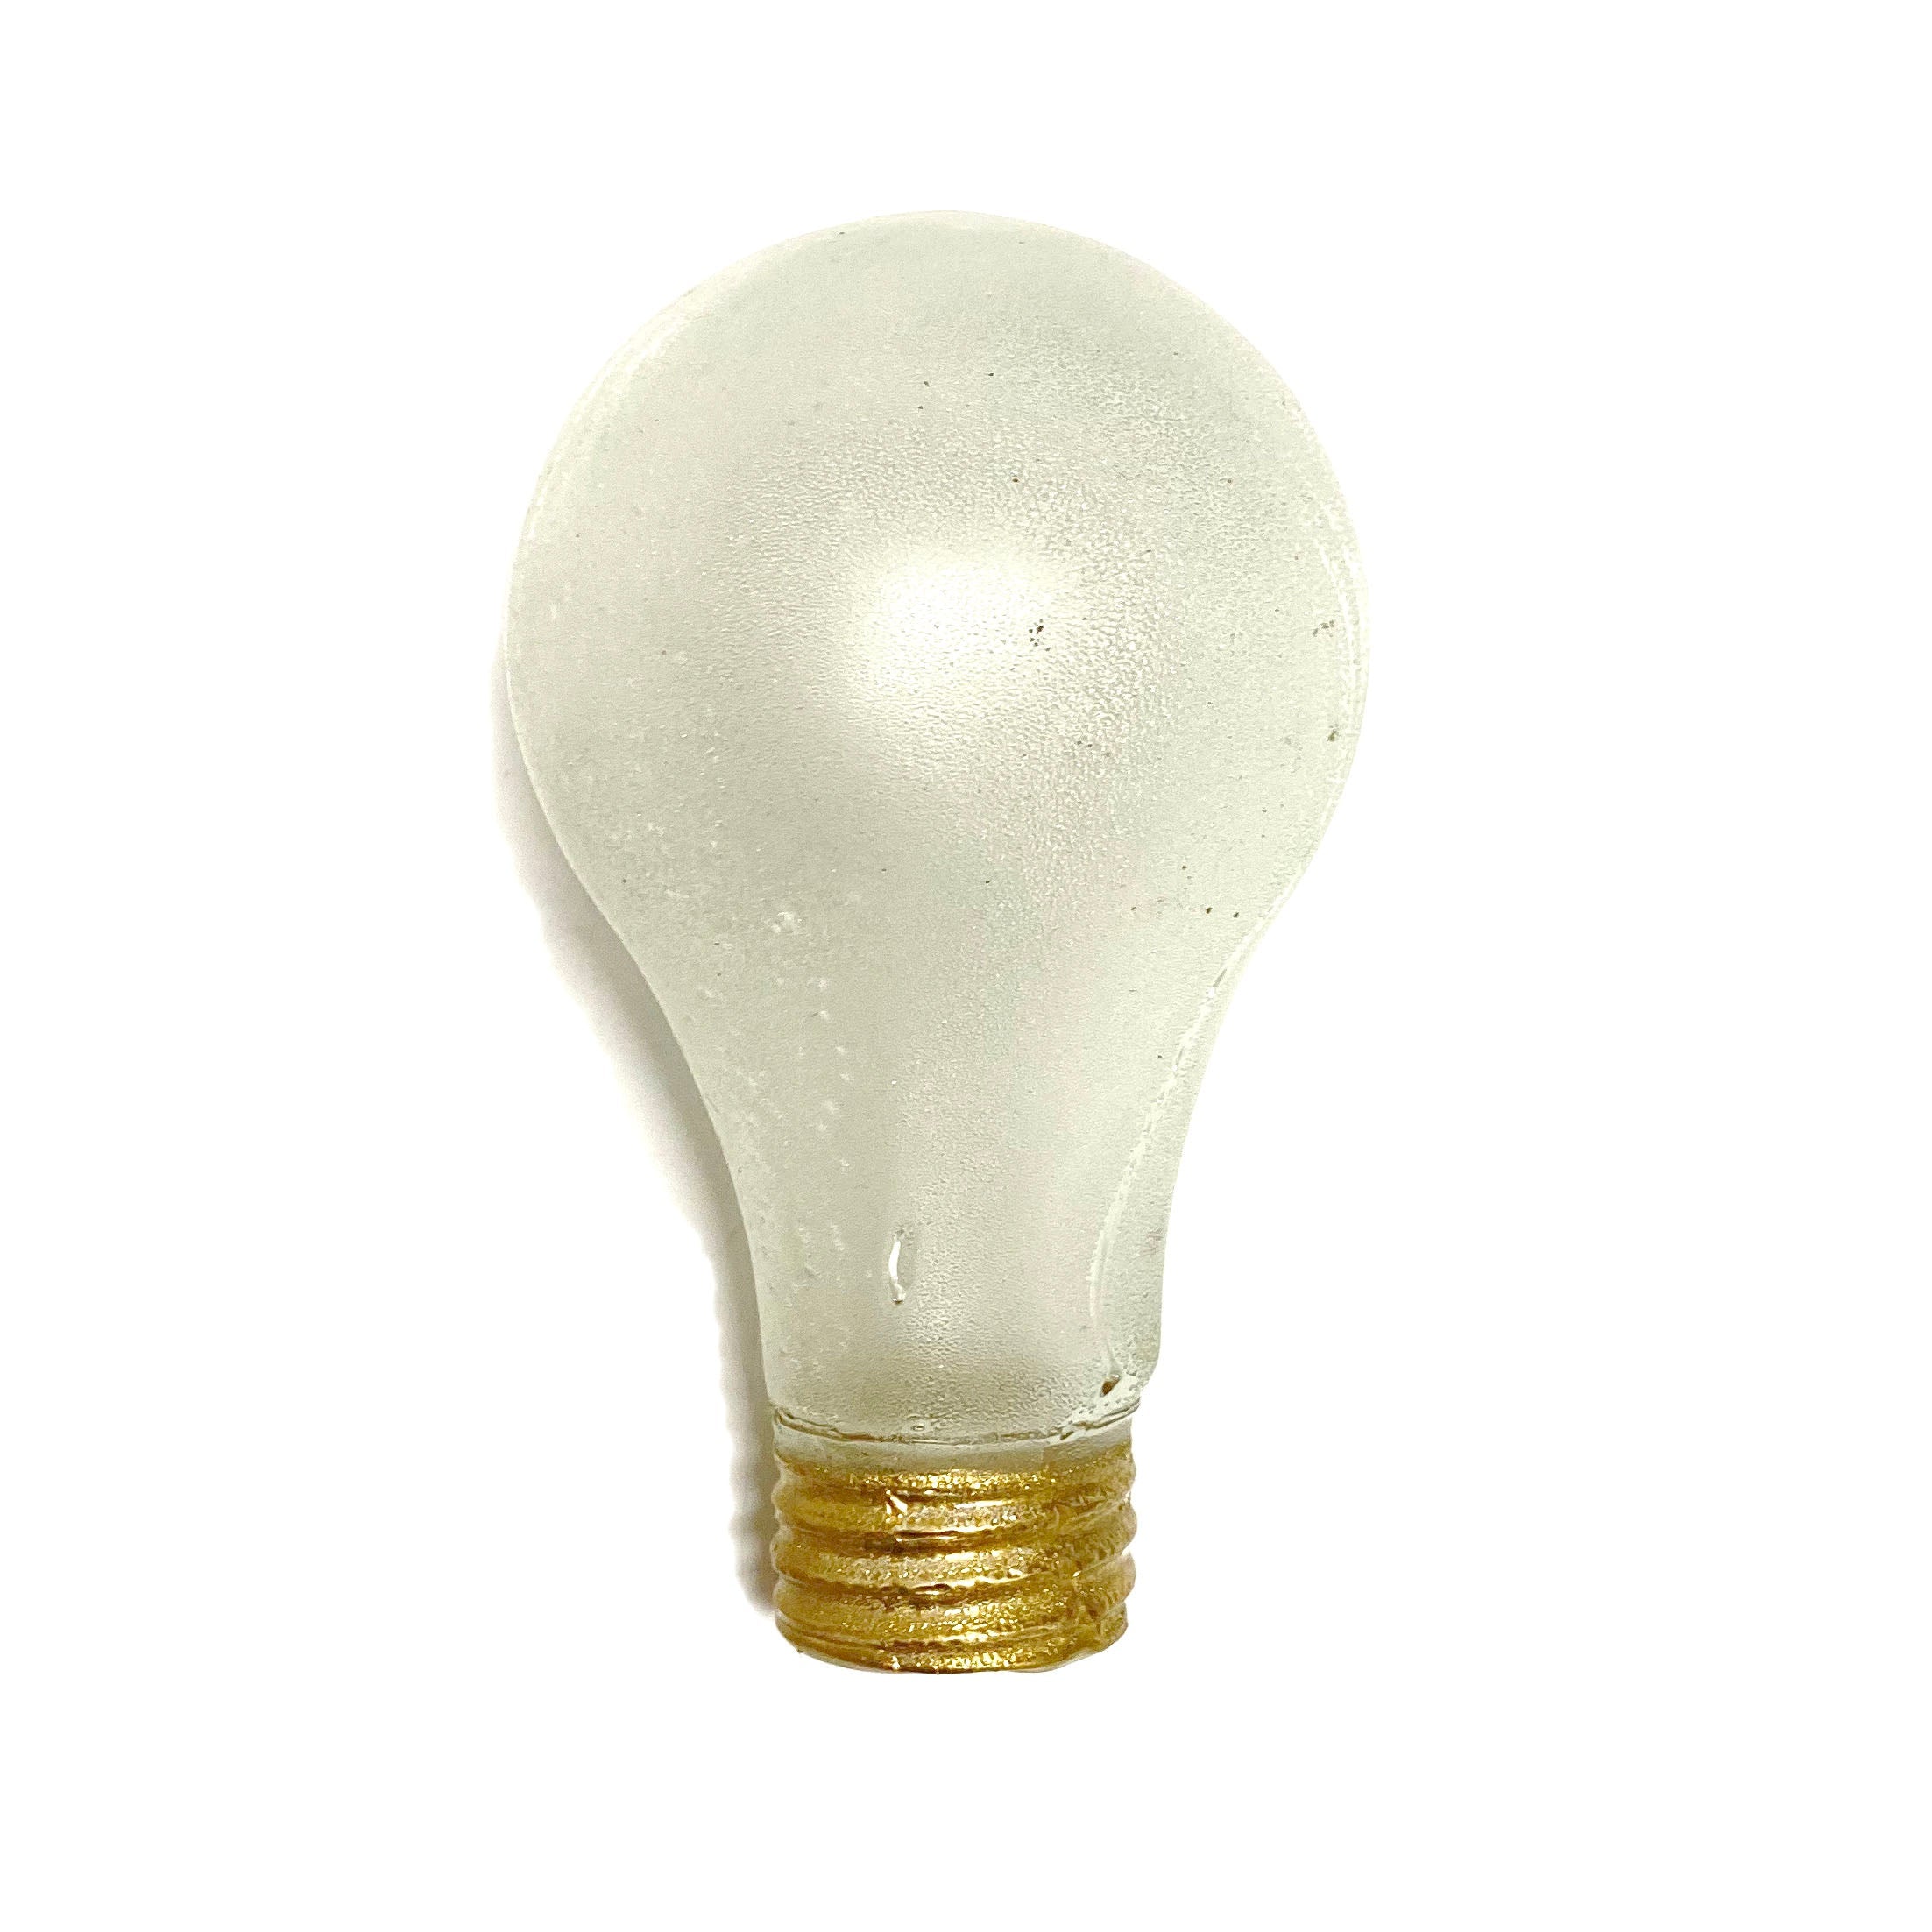 SMASHProps Breakaway Standard Light Bulb - FROSTED / GOLD - Frosted Bulb,Gold Base